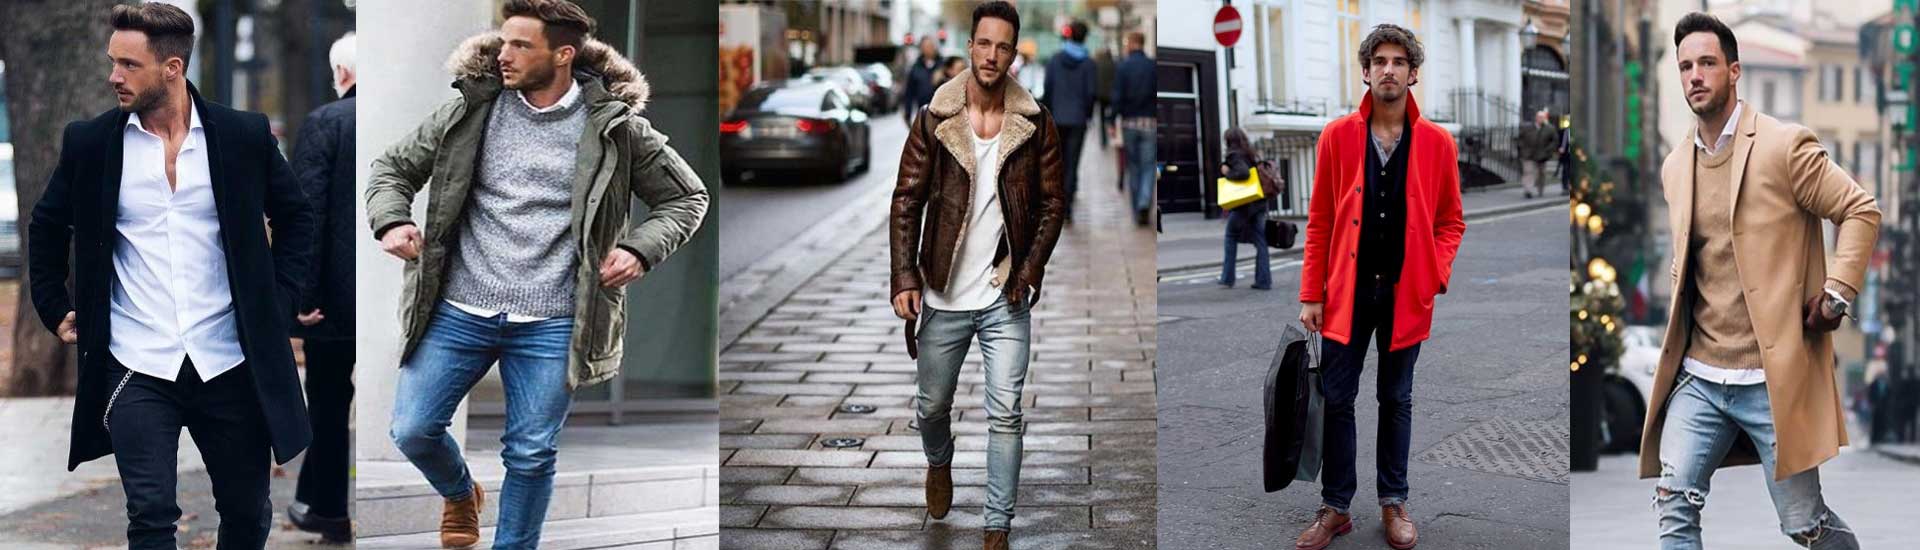 MEN’S WINTER FASHION STYLE GUIDE FOR 2020 : FashioNectar